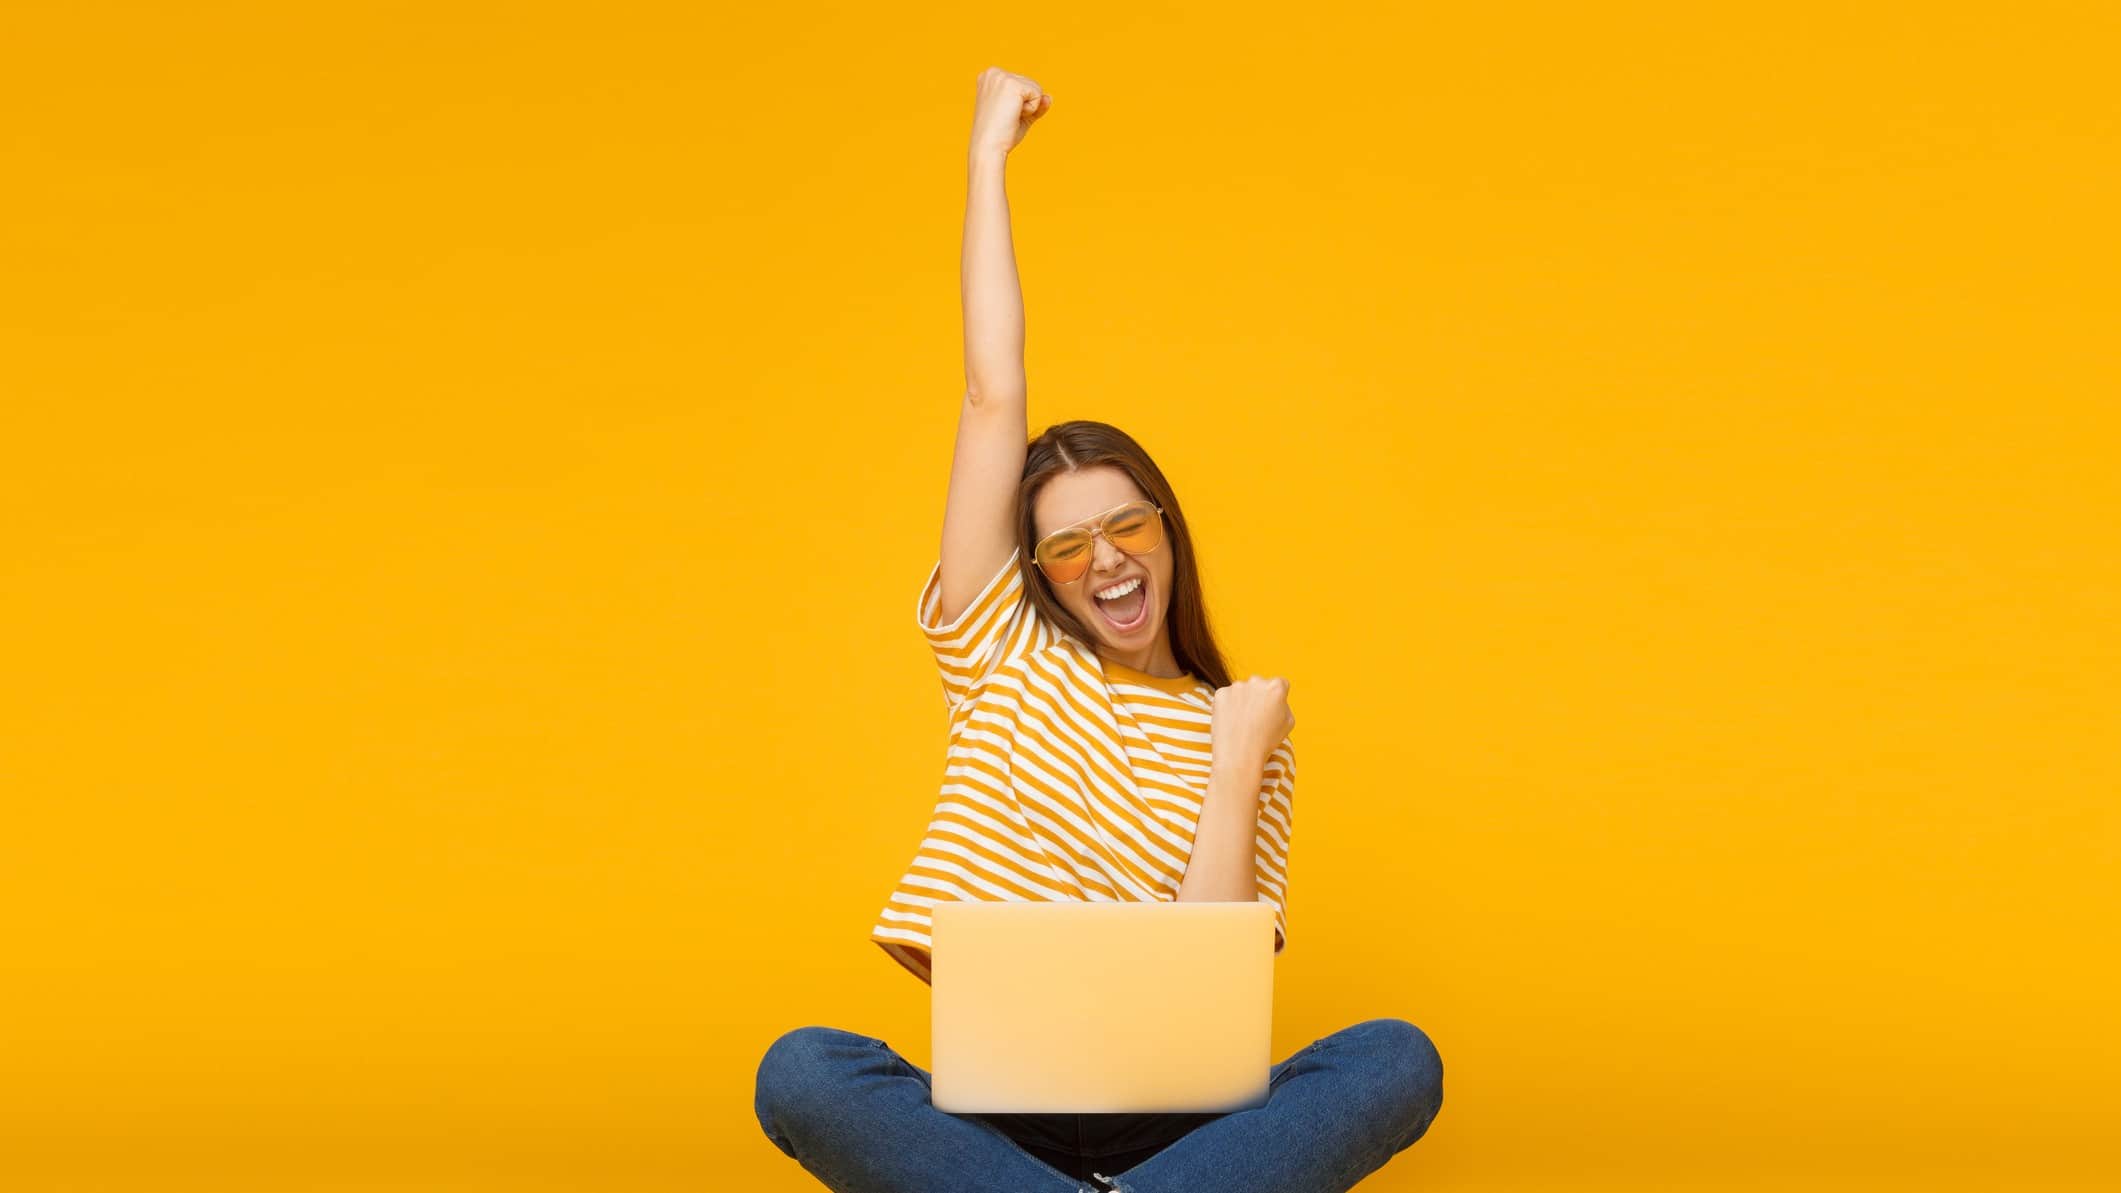 Young woman in yellow striped top with laptop raises her arm to victory